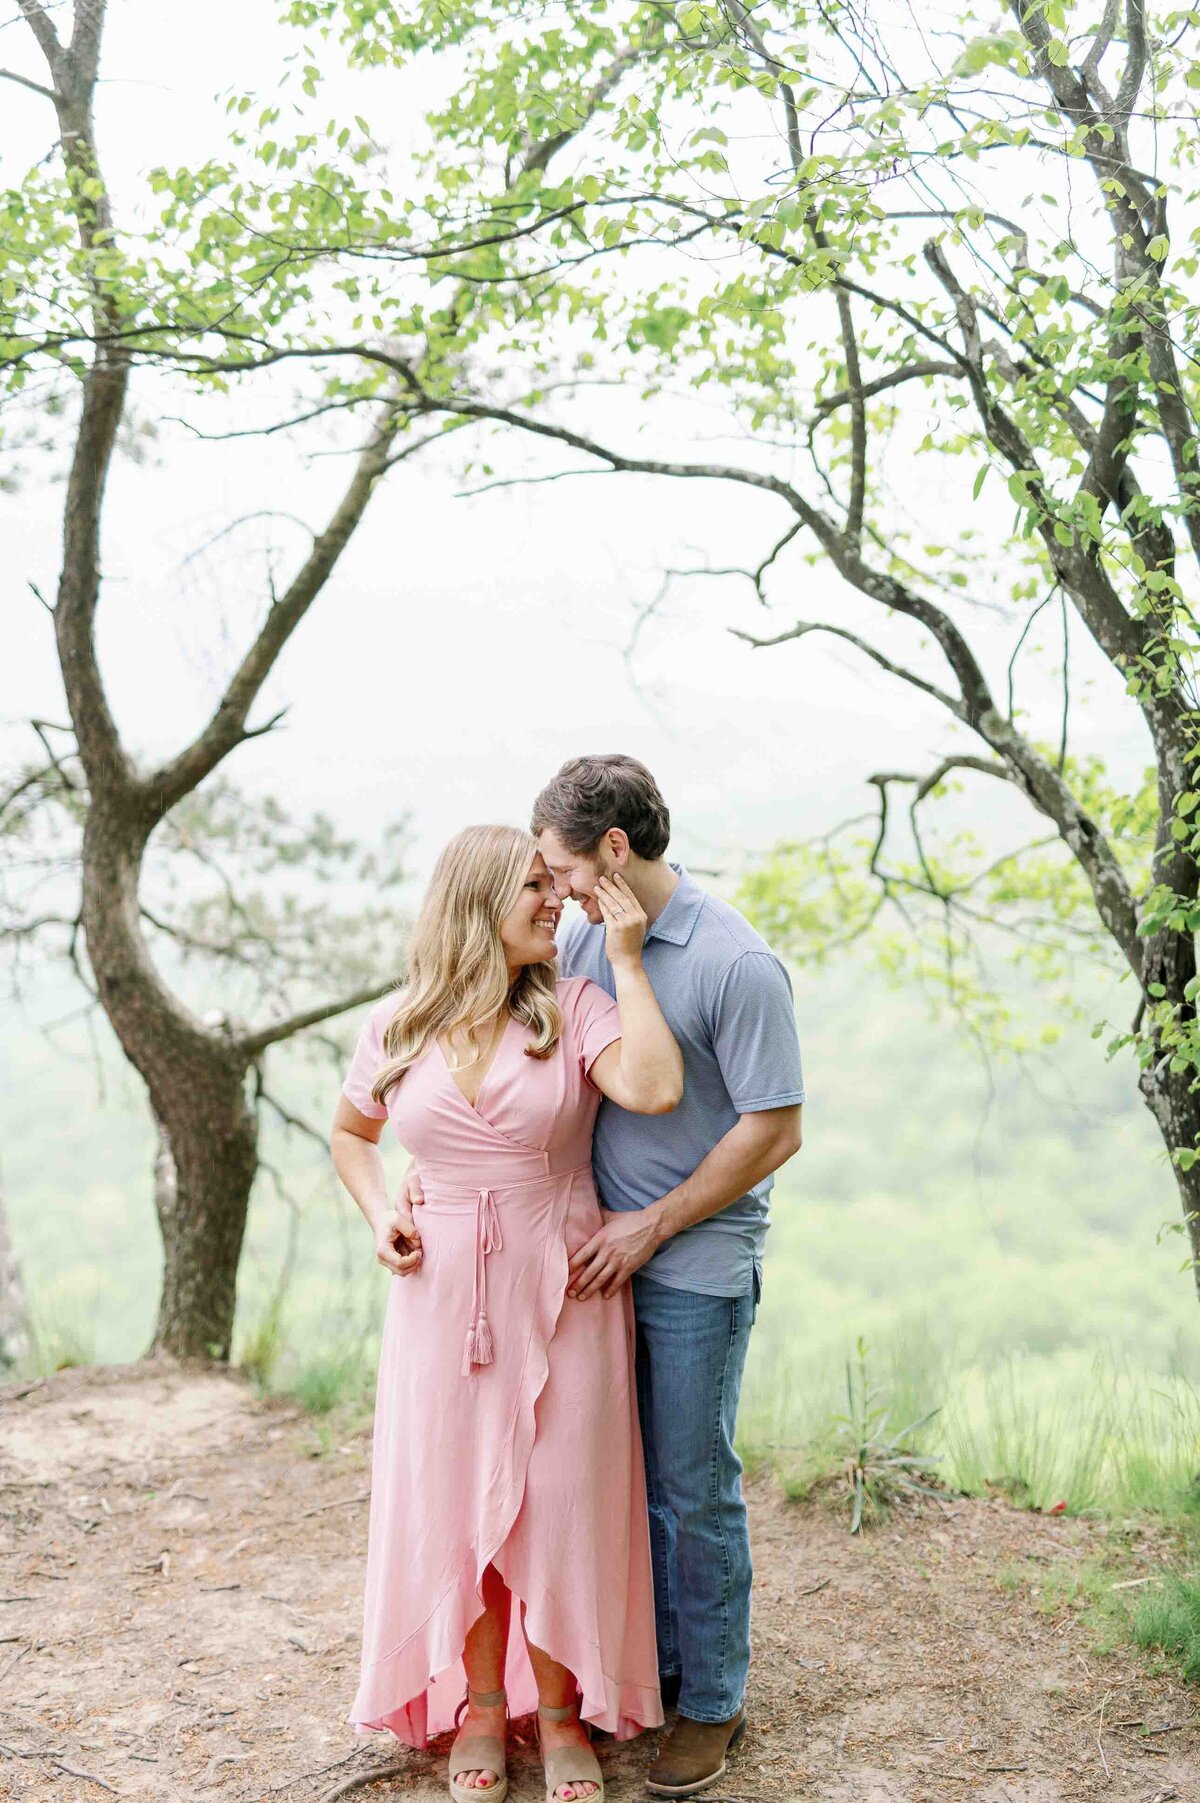 Alaina-Rene-Knoxville-Tennessee-Wedding-Engagement-Senior-Phtoography-Light-And-Airy_10